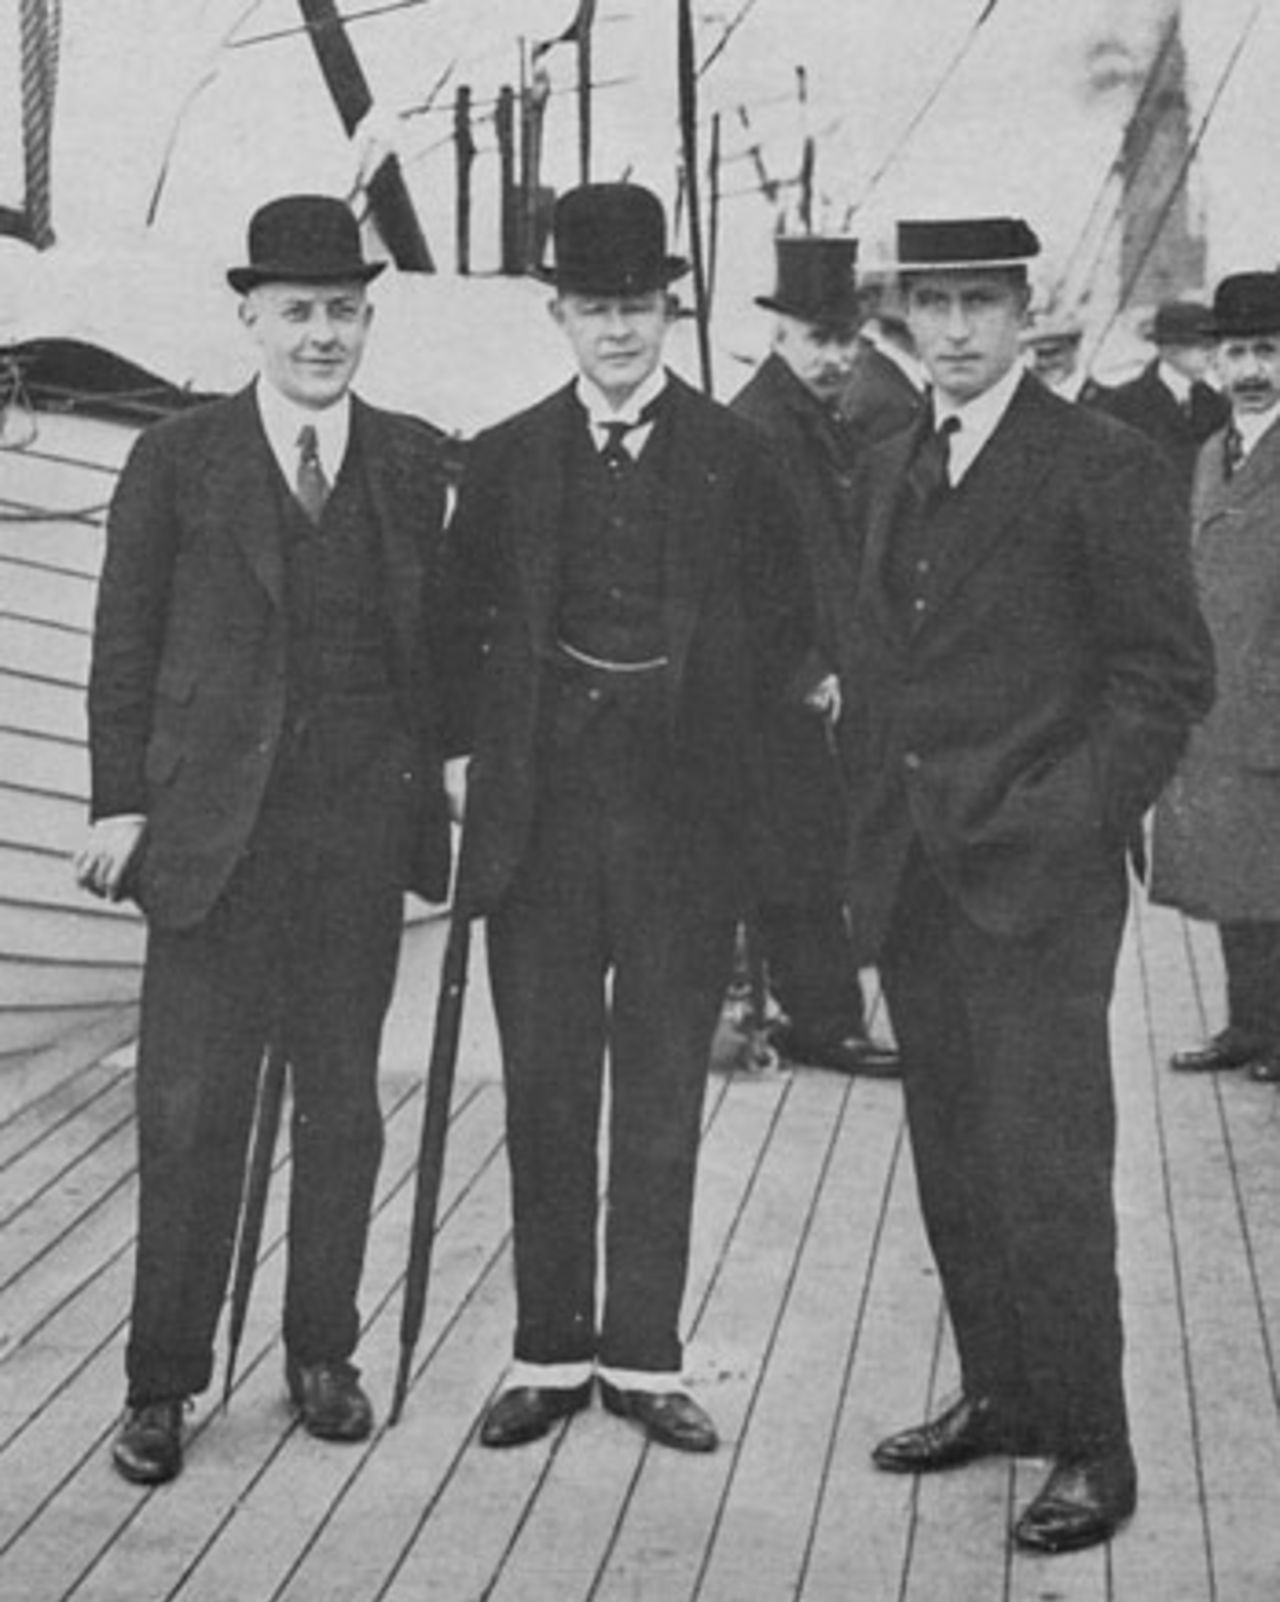 HDG Leveson-Gower (left) and Pelham Warner (middle) say farewell to Johnny Douglas as England leave for their 1913-14 tour of South Africa